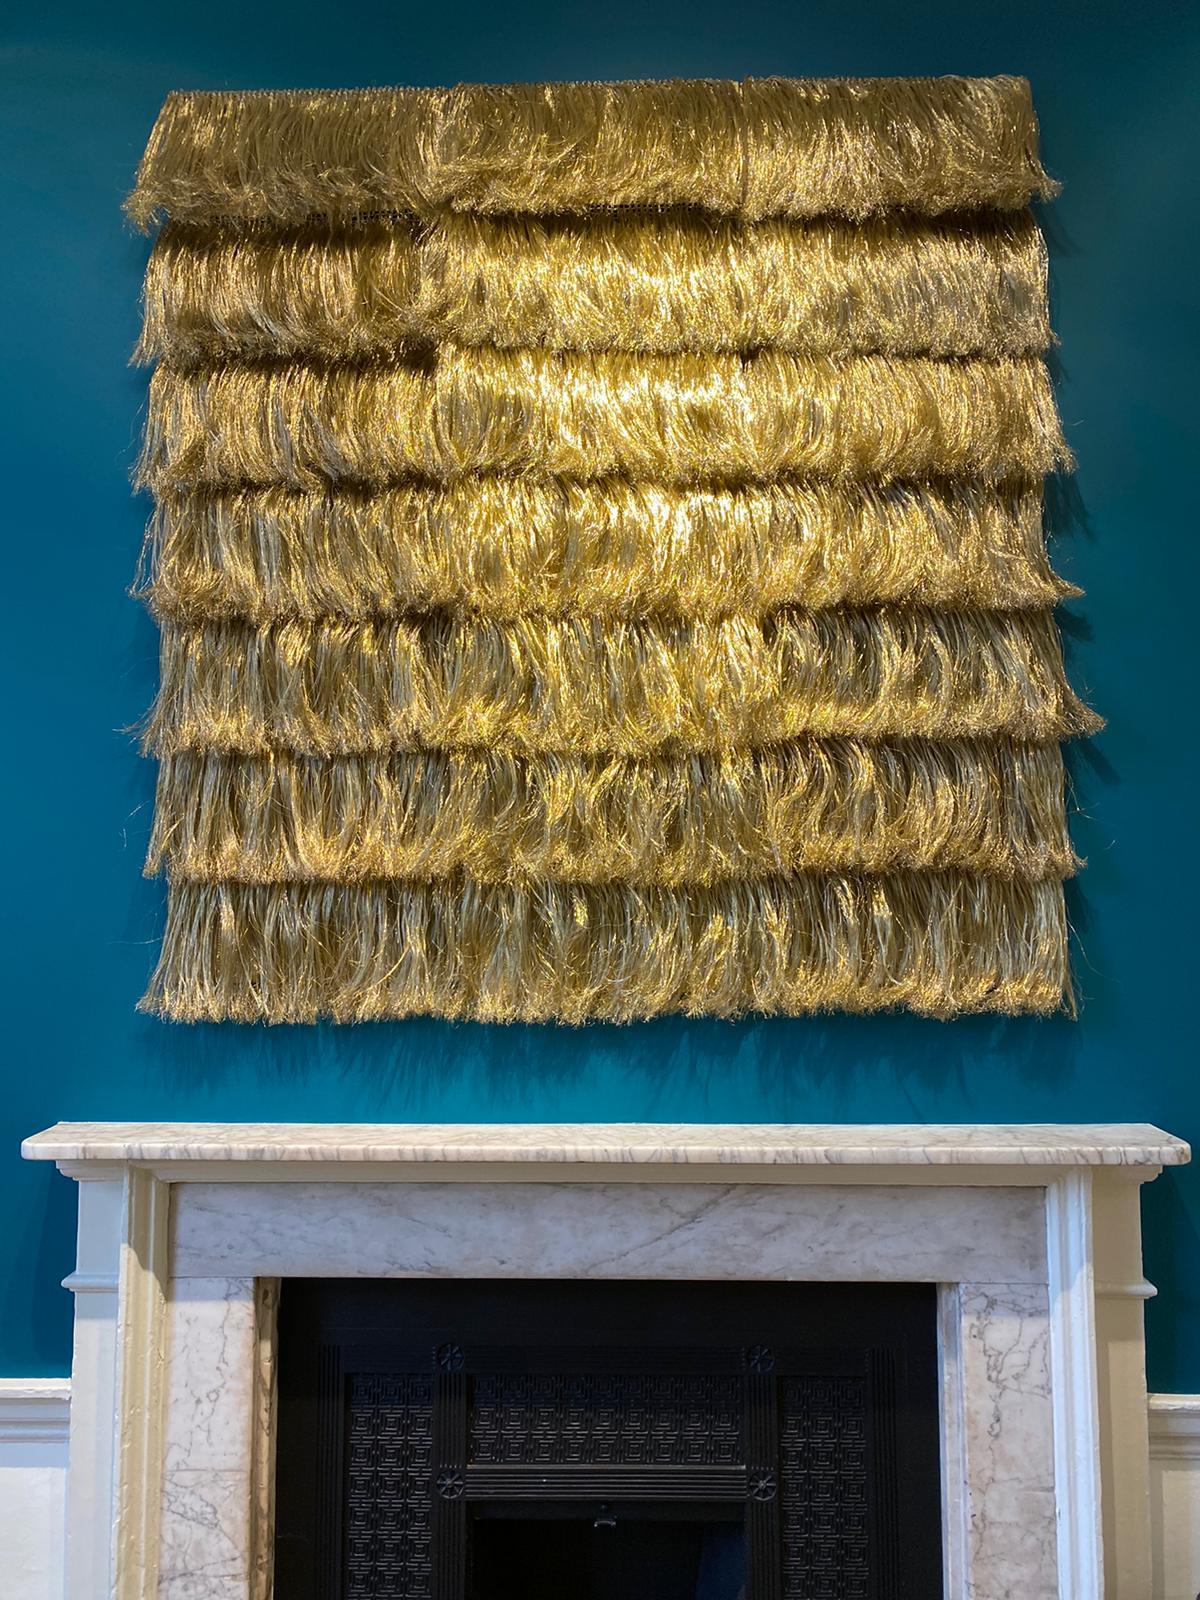 Brass Fringes wall piece by Annemette Beck, brass and paper yarn, 150cm width 160cm height , entirely hand woven , unique piece entirely handmade in Denmark.

Annemette Beck is a Danish textile designer based in Fanoe, a small island in the Wadden